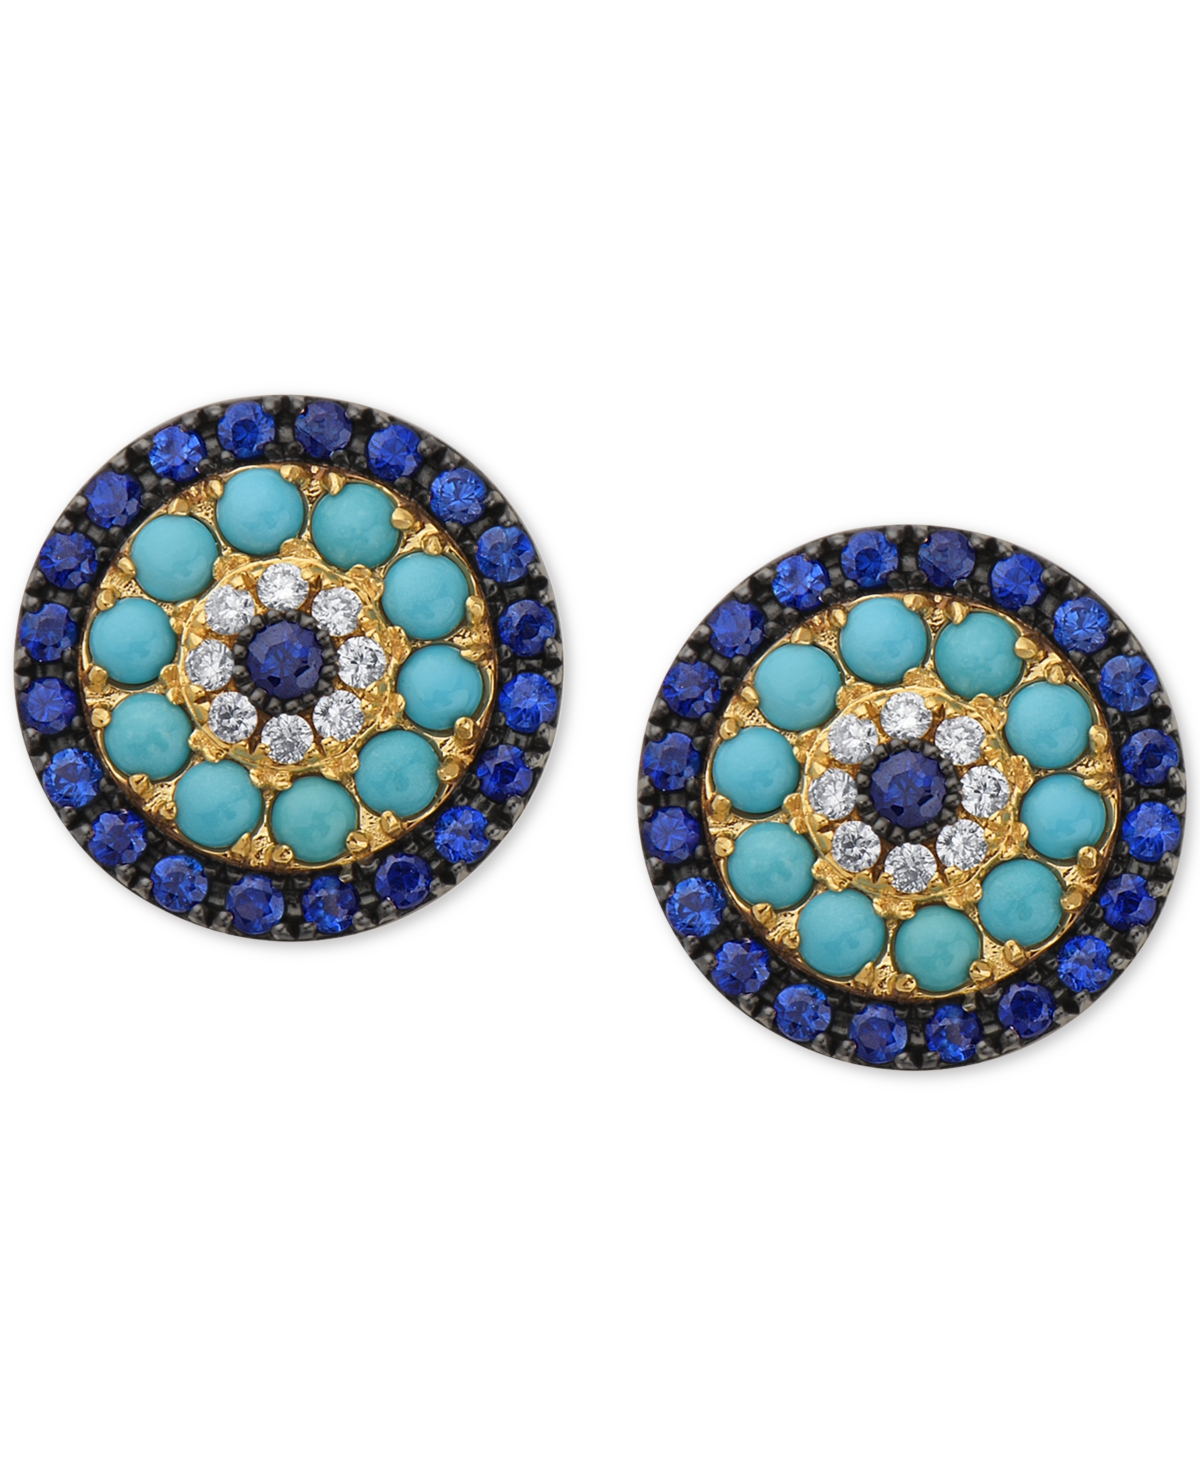 Effy Collection Effy Sapphire (1-1/2 ct. t.w.), Turquoise & Diamond (1/10 ct. t.w.) Stud Earrings in 14k Gold